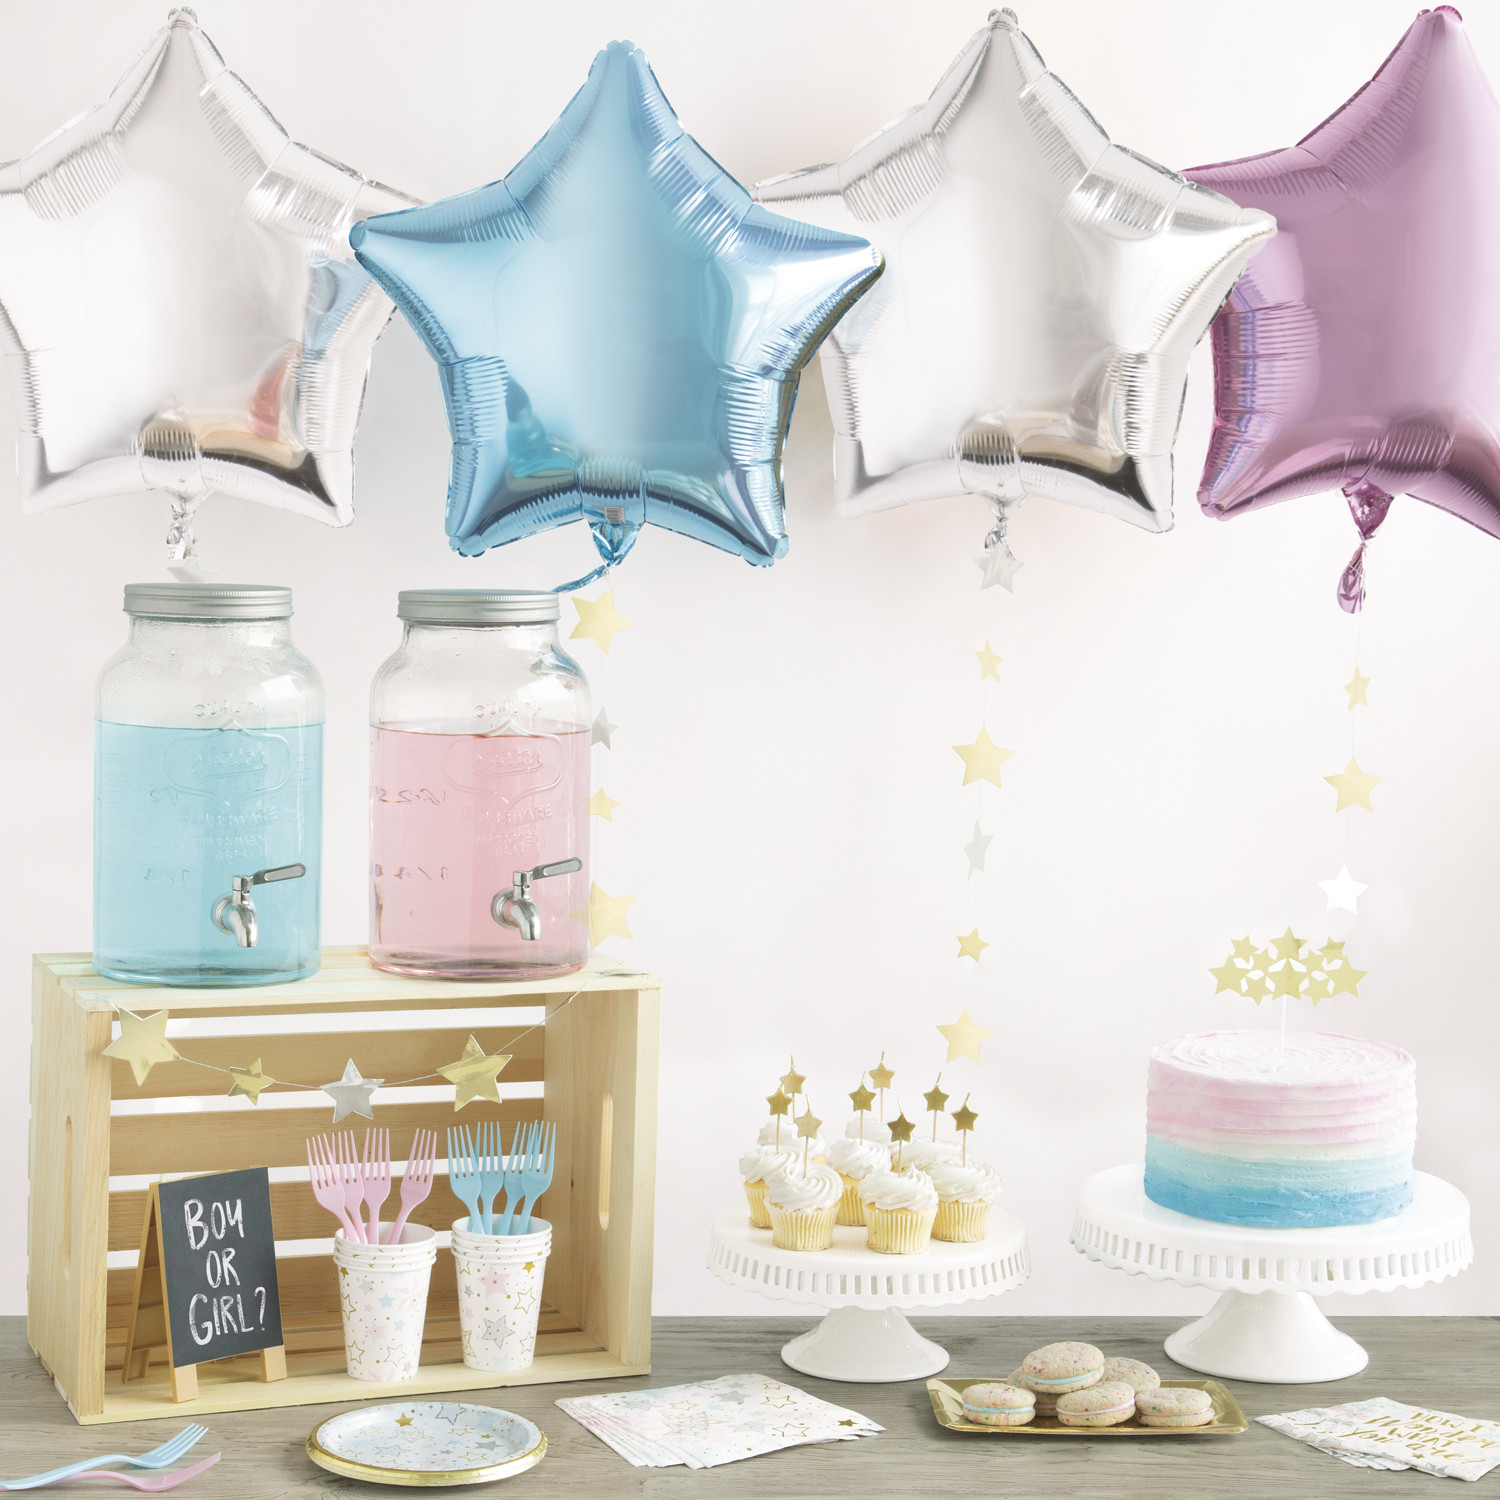 Party Gender Reveal Ideas
 Gender Reveal Party Ideas